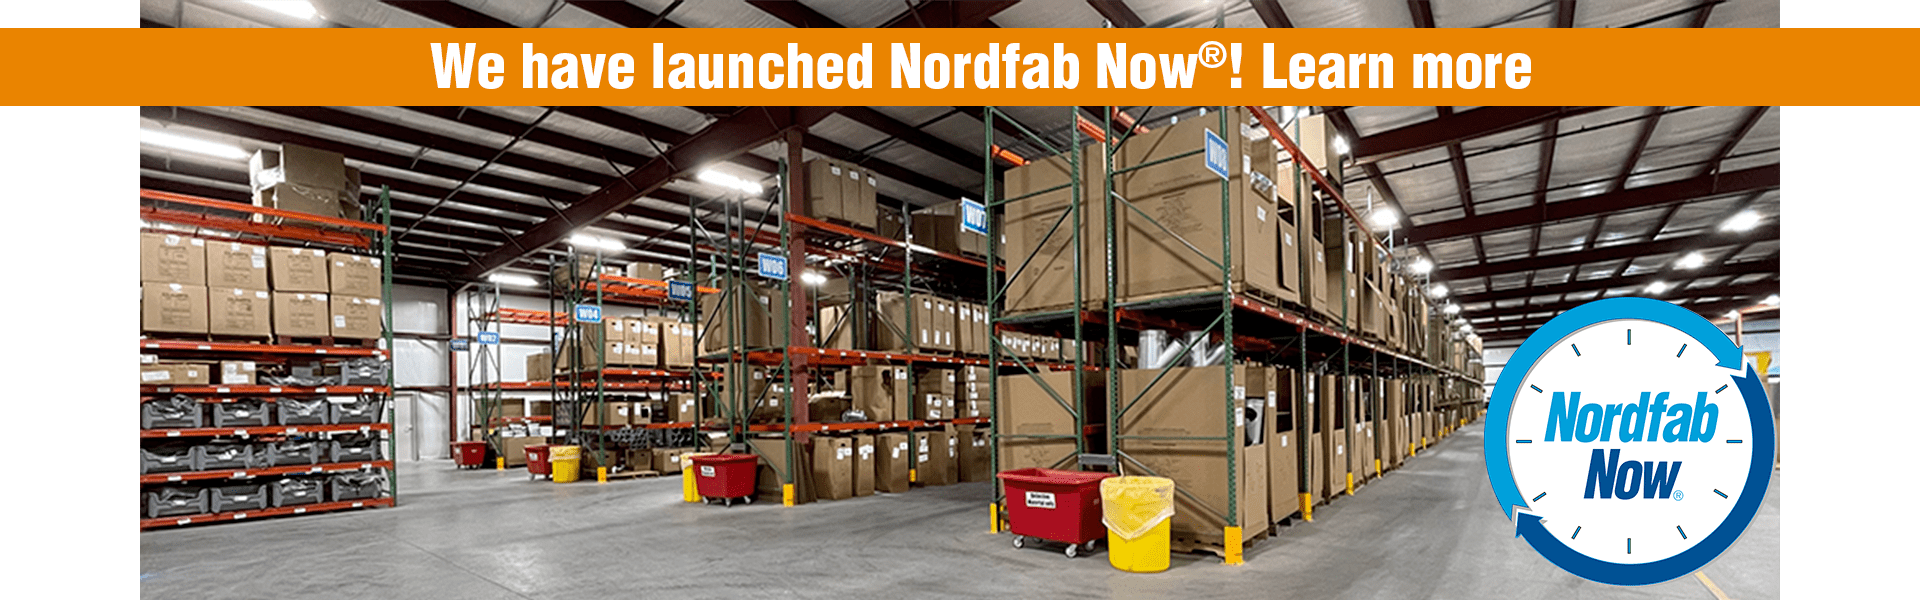 Nordfab Now Launched